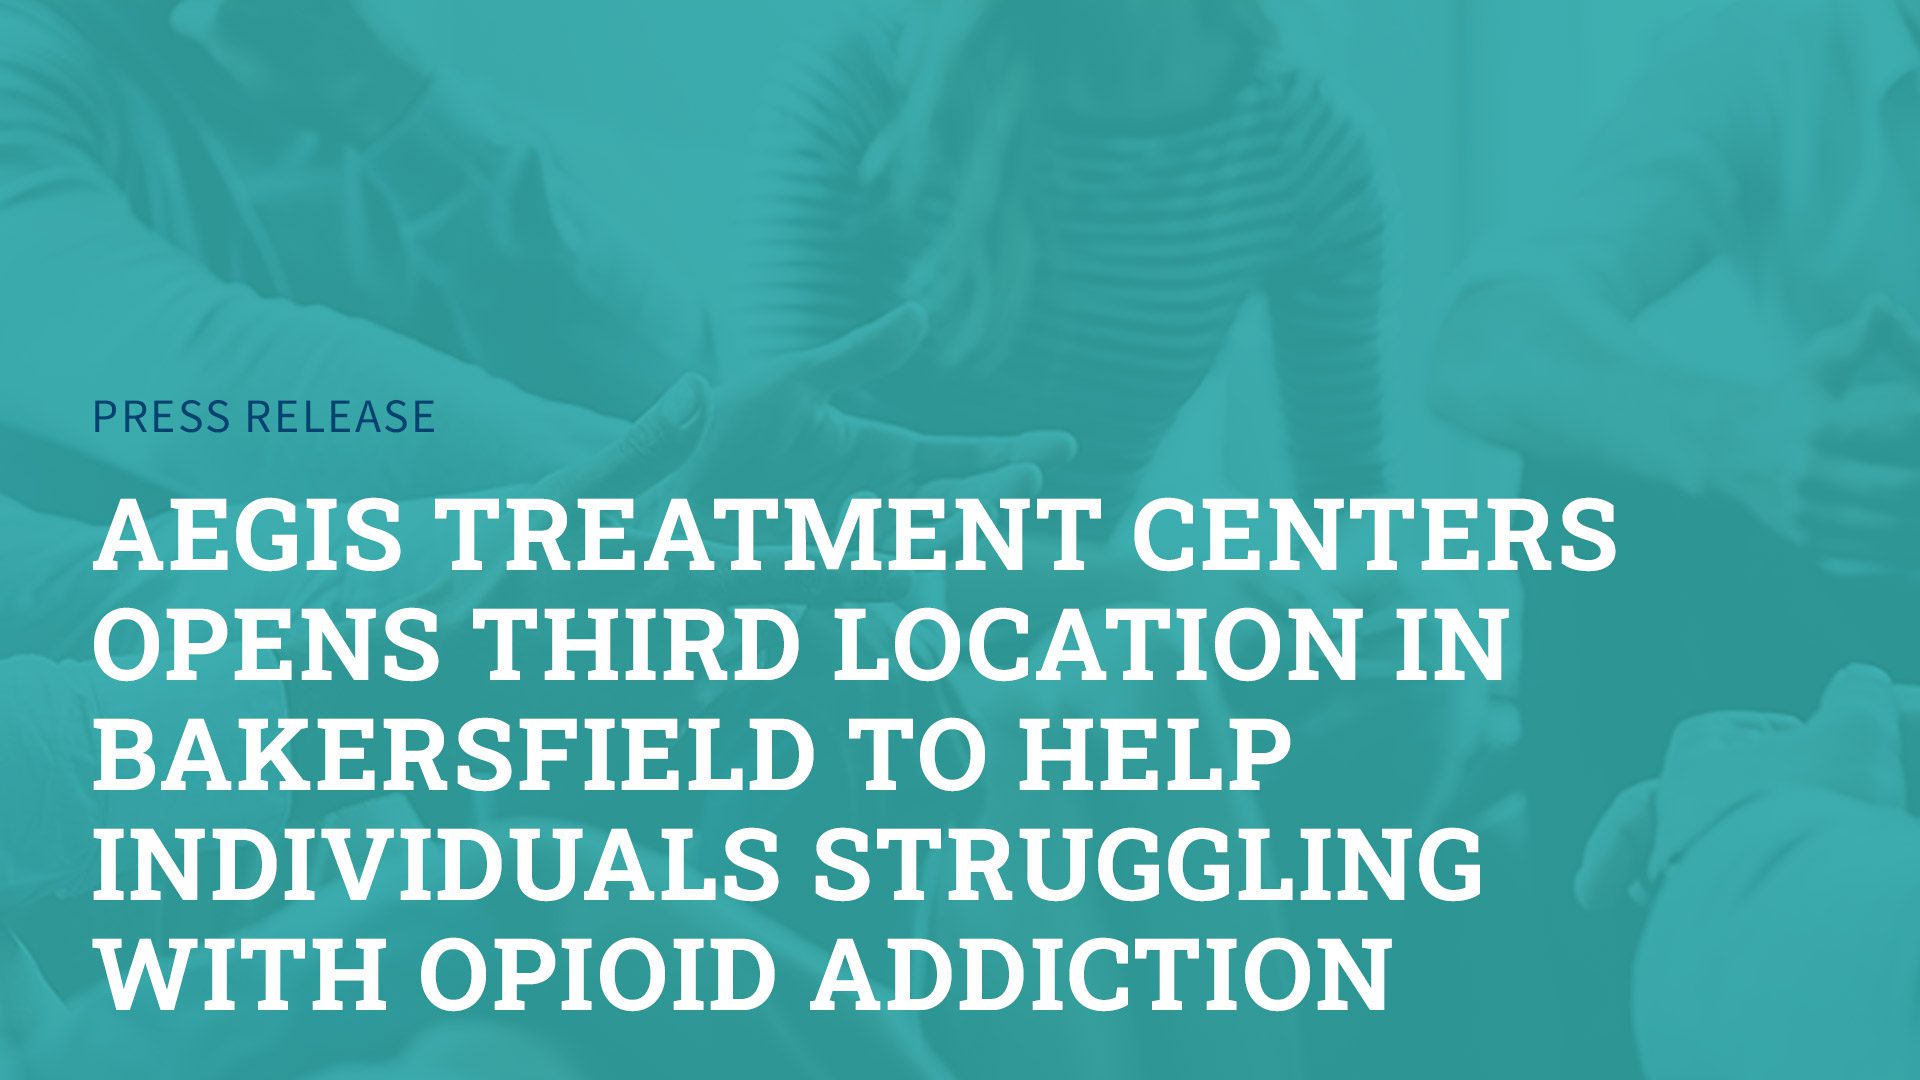 Aegis Treatment Centers Opens Third Location in Bakersfield to Help Individuals Struggling with Opioid Addiction